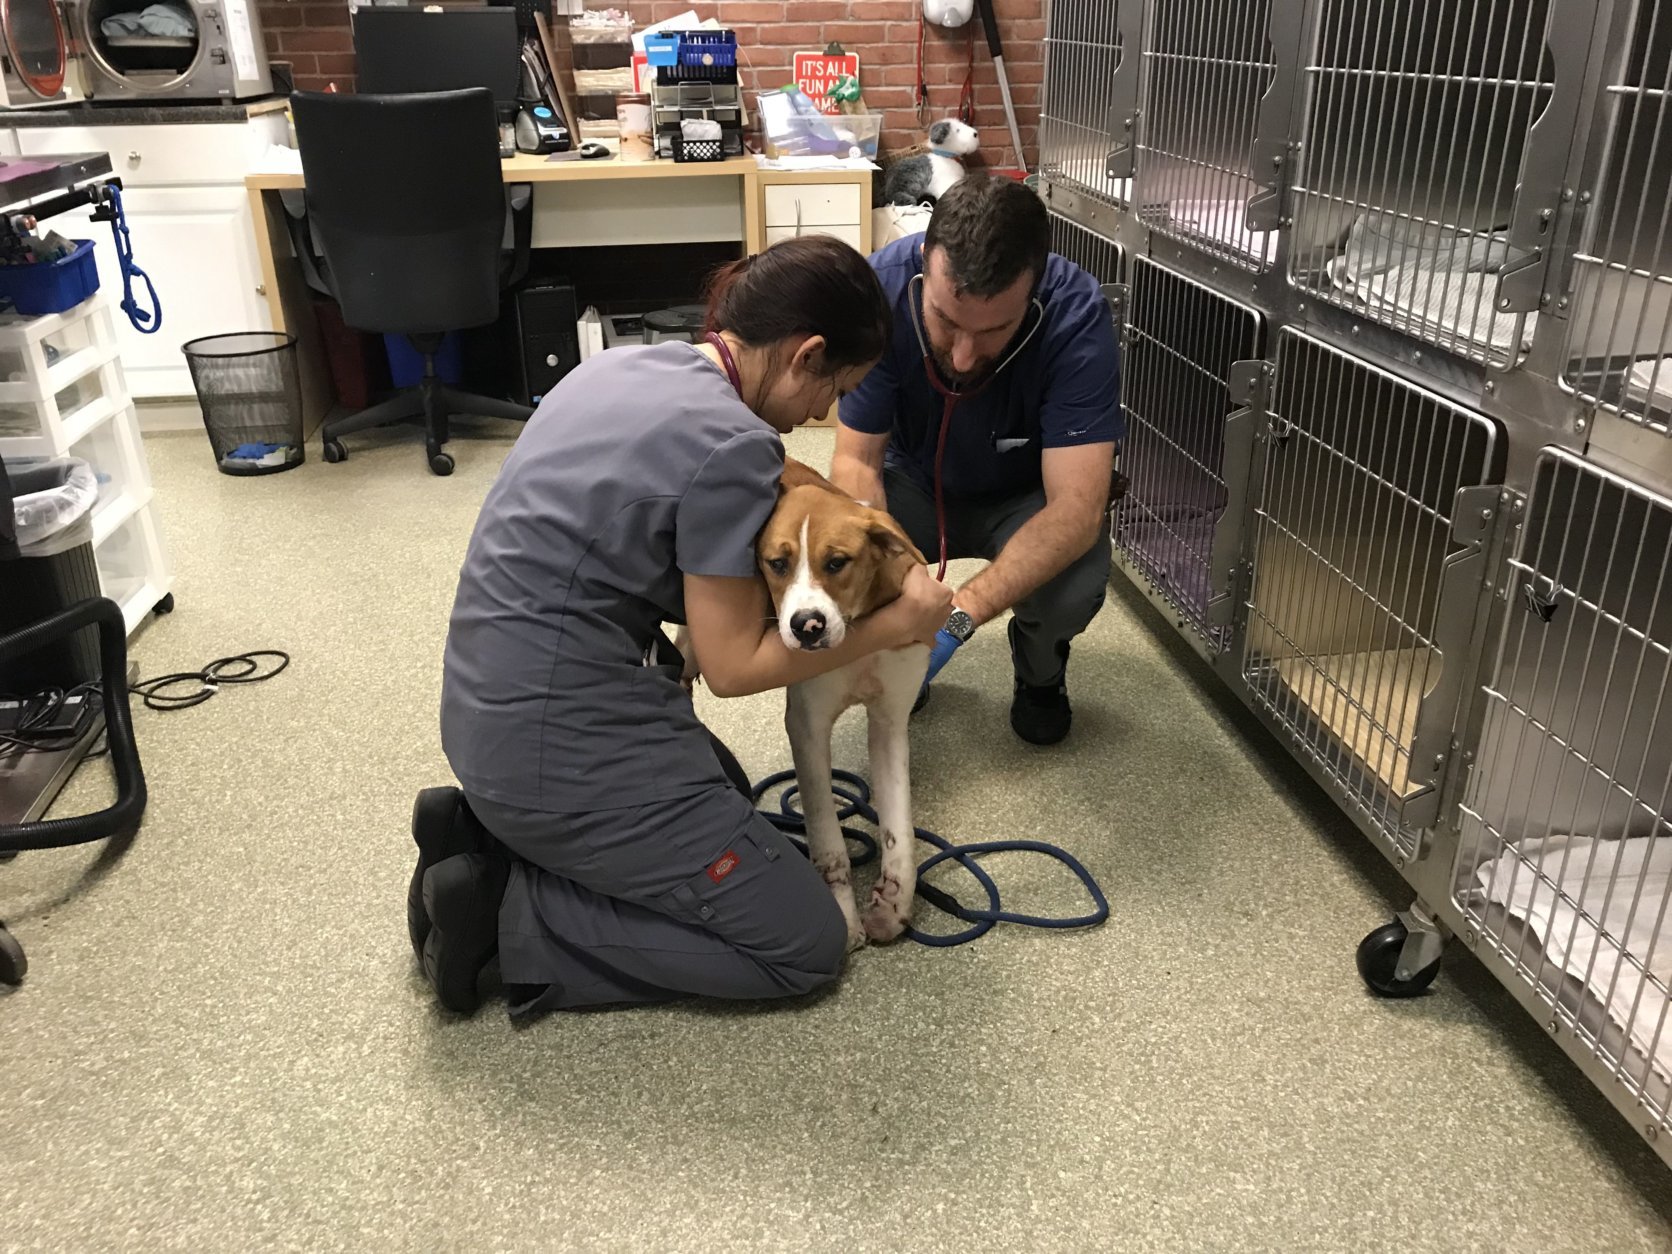  Now, the Humane Rescue Alliance said the dog has been treated for severe injuries and the man has been arrested this week. (Courtesy Humane Rescue Alliance)